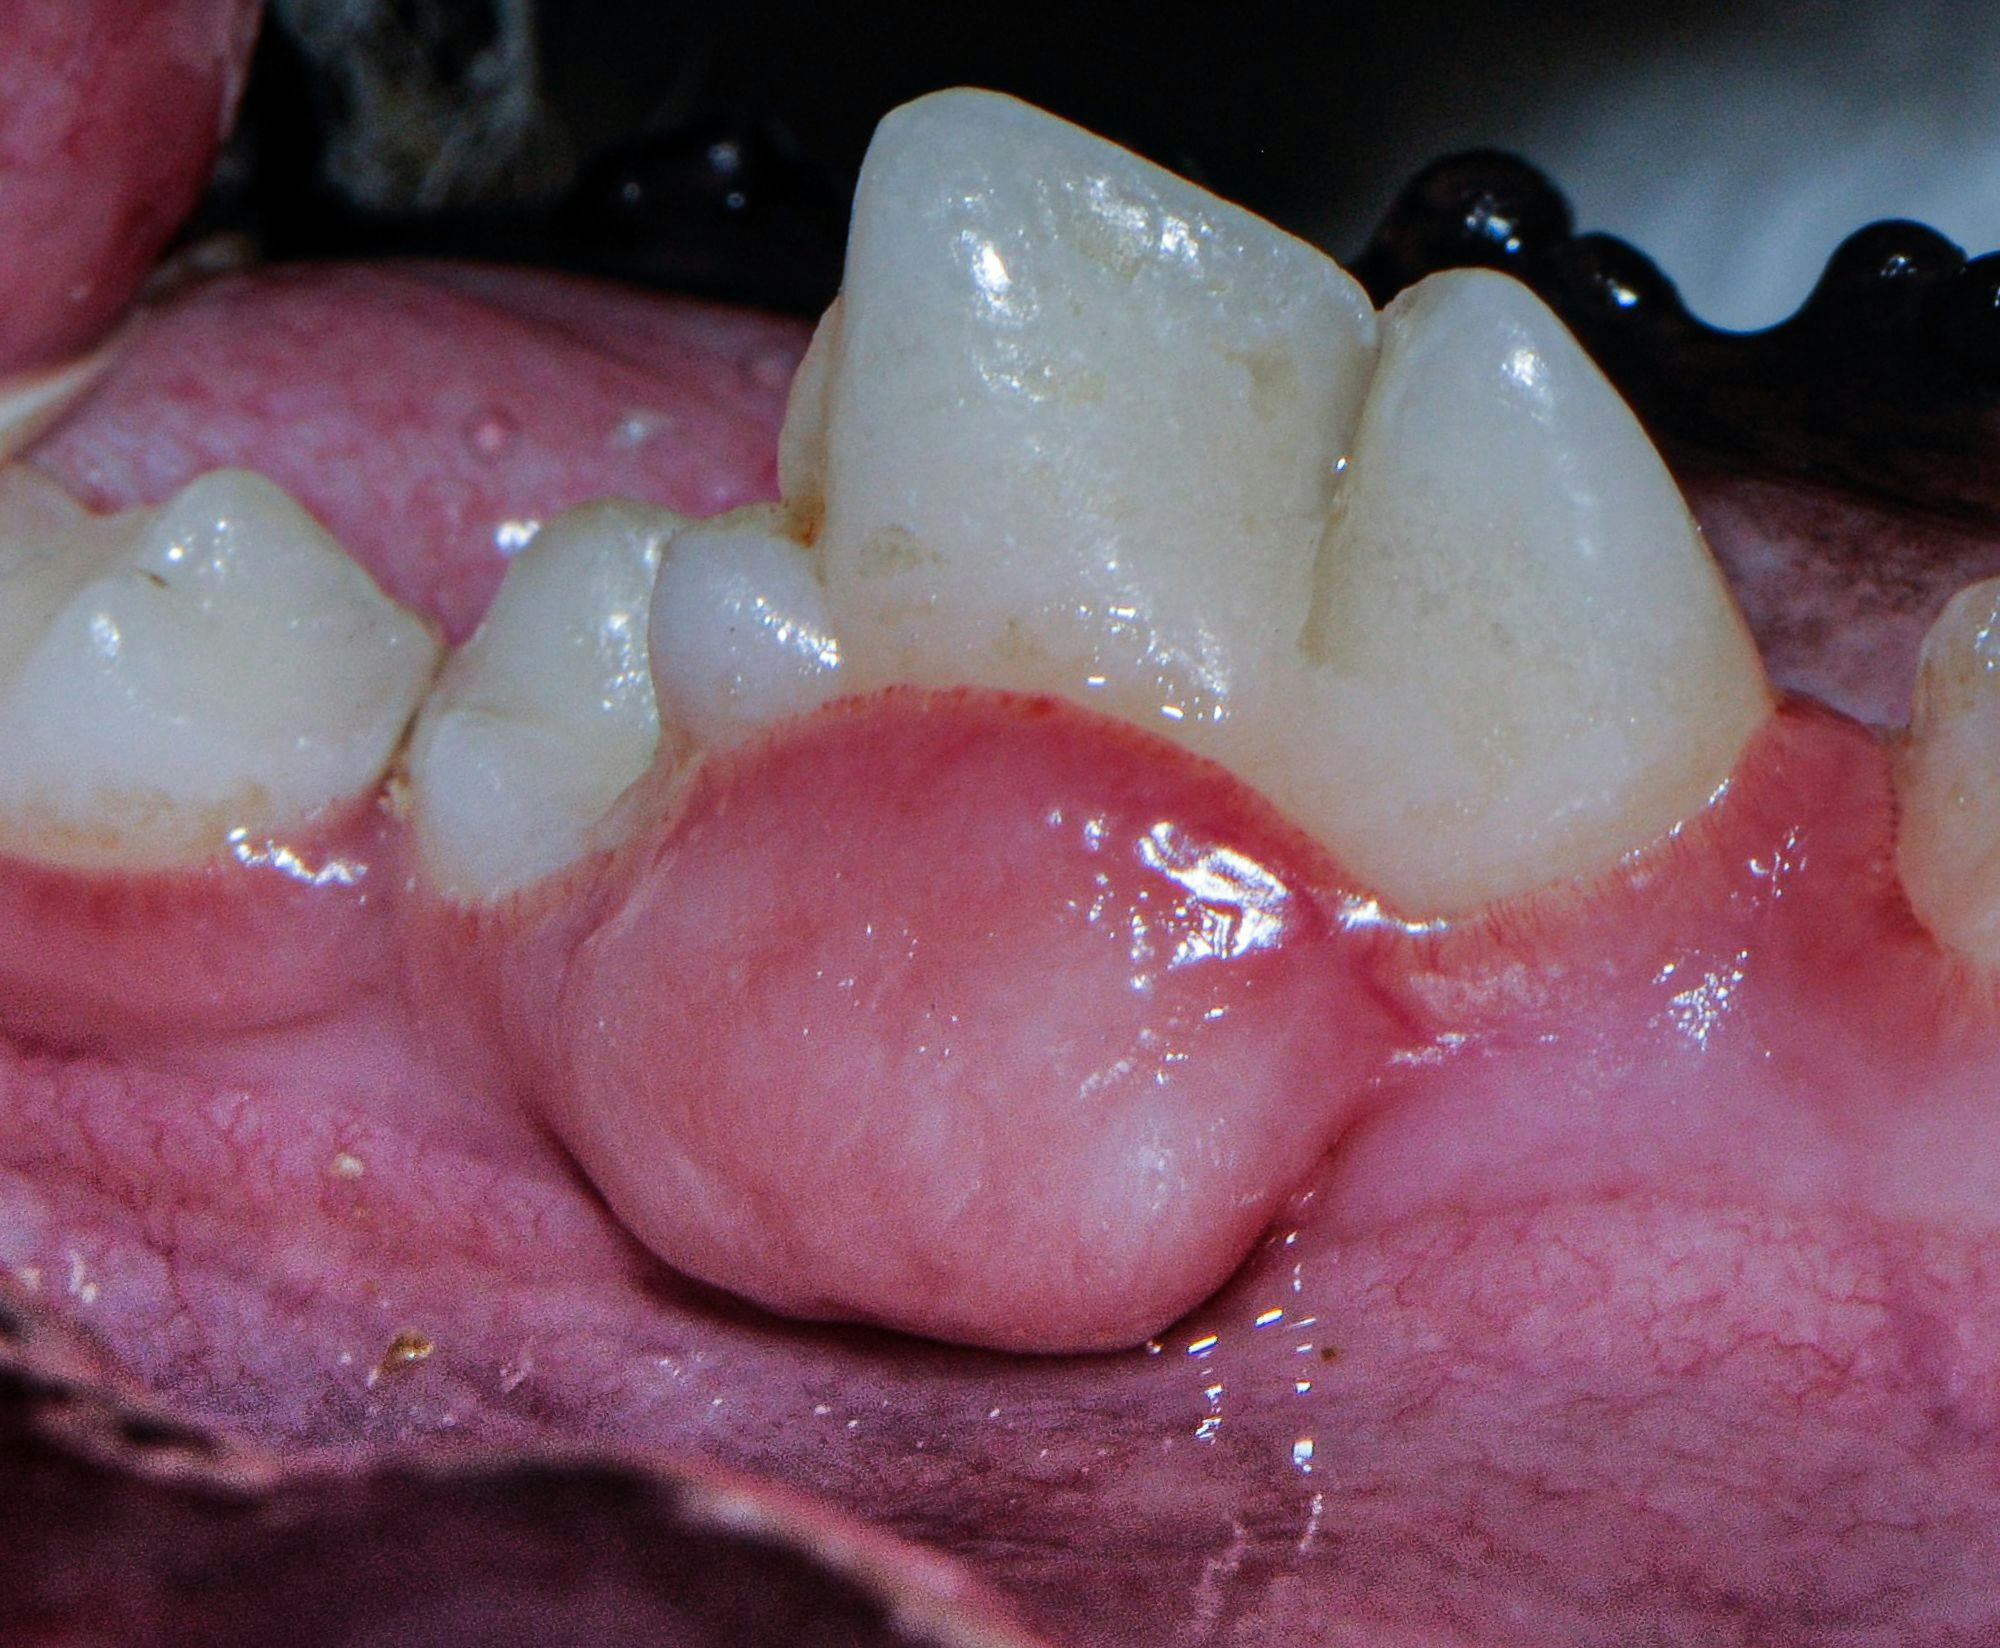 Peripheral odontogenic fibroma (All images courtesy of Jan Bellows, DVM, DAVDC, DABVP, FAVD)